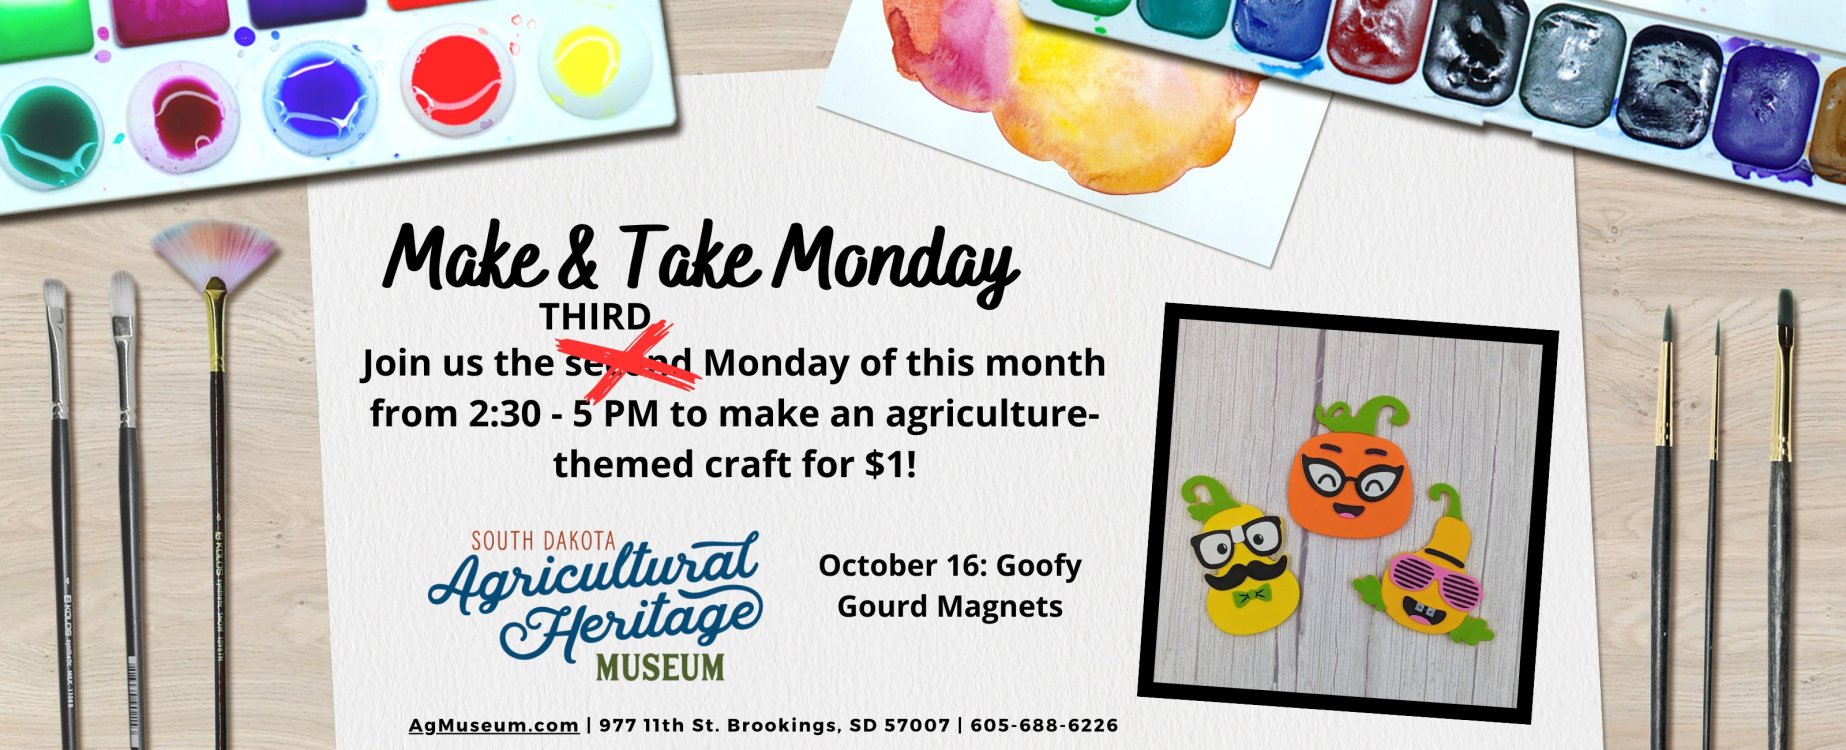 October 16 Make & Take Monday Craft: Goofy Gourd Magnets.  Due to Native American Day, join us the on the THIRD Monday of this month from 2:30 to 5 p.m. to make an agriculture-themed craft for $1!